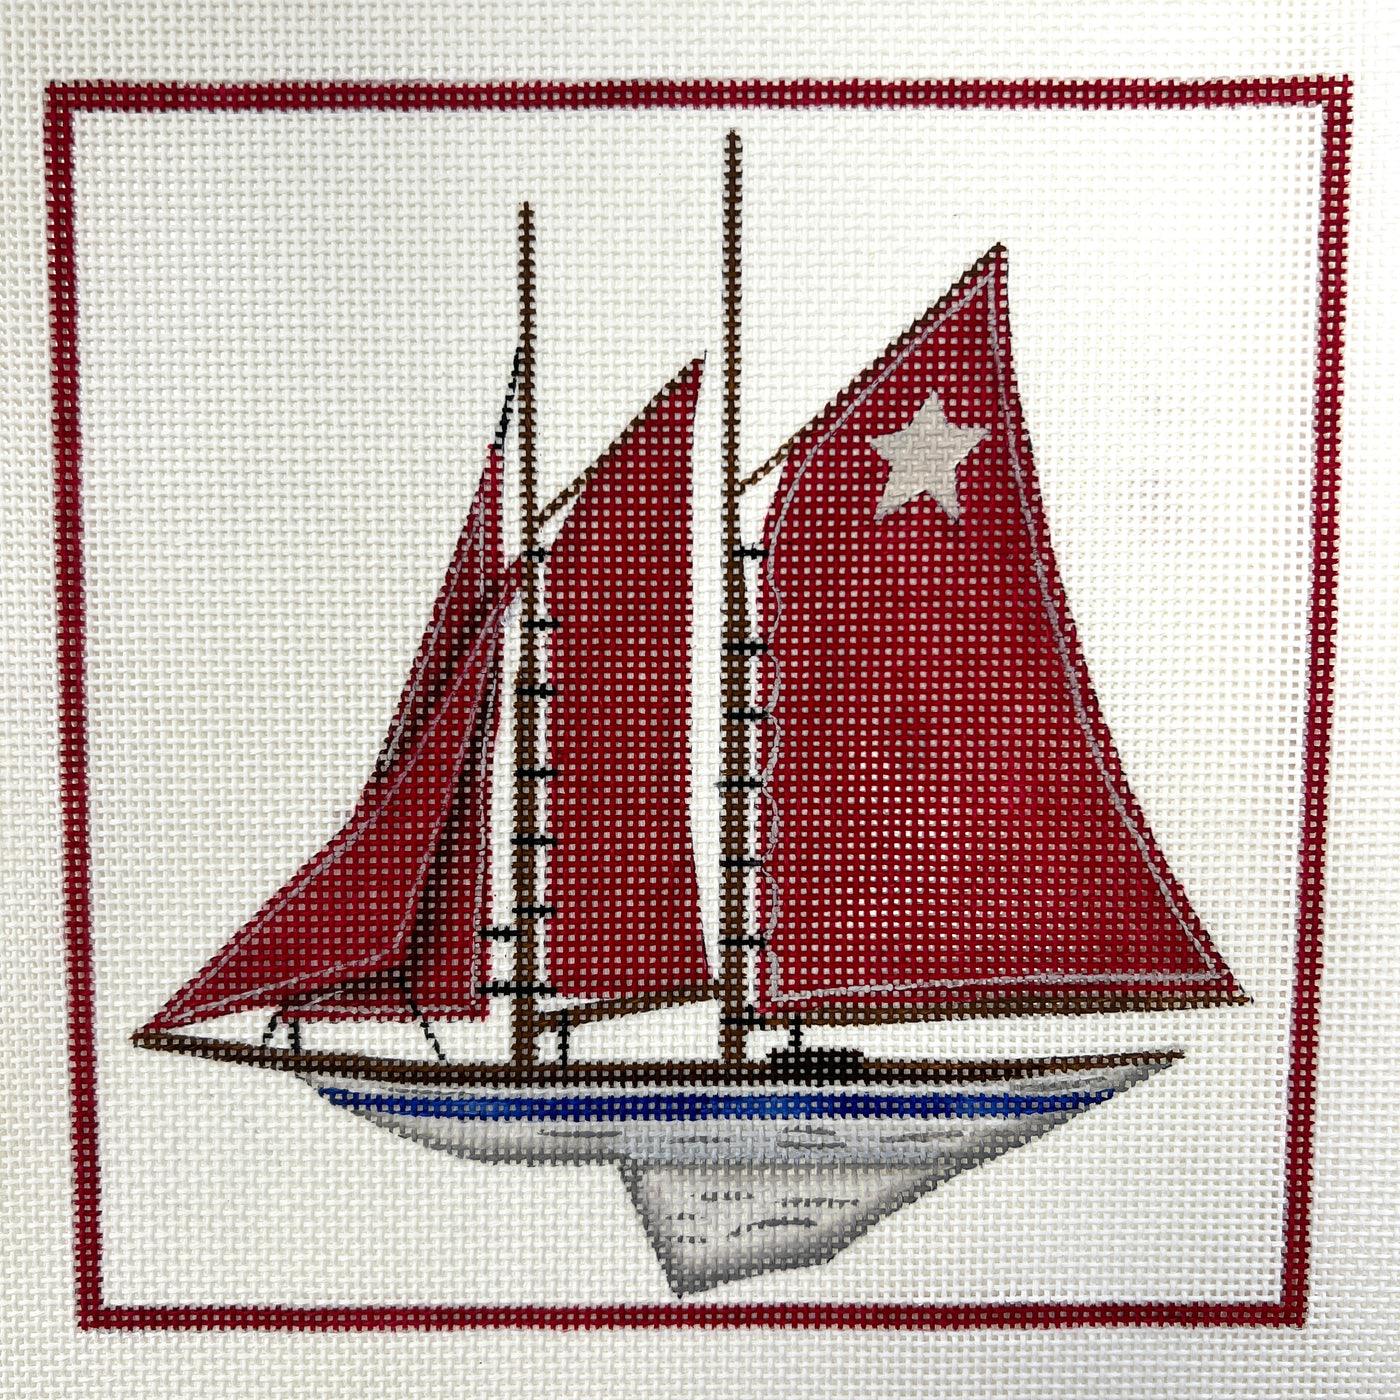 Red Sails Needlepoint Canvas